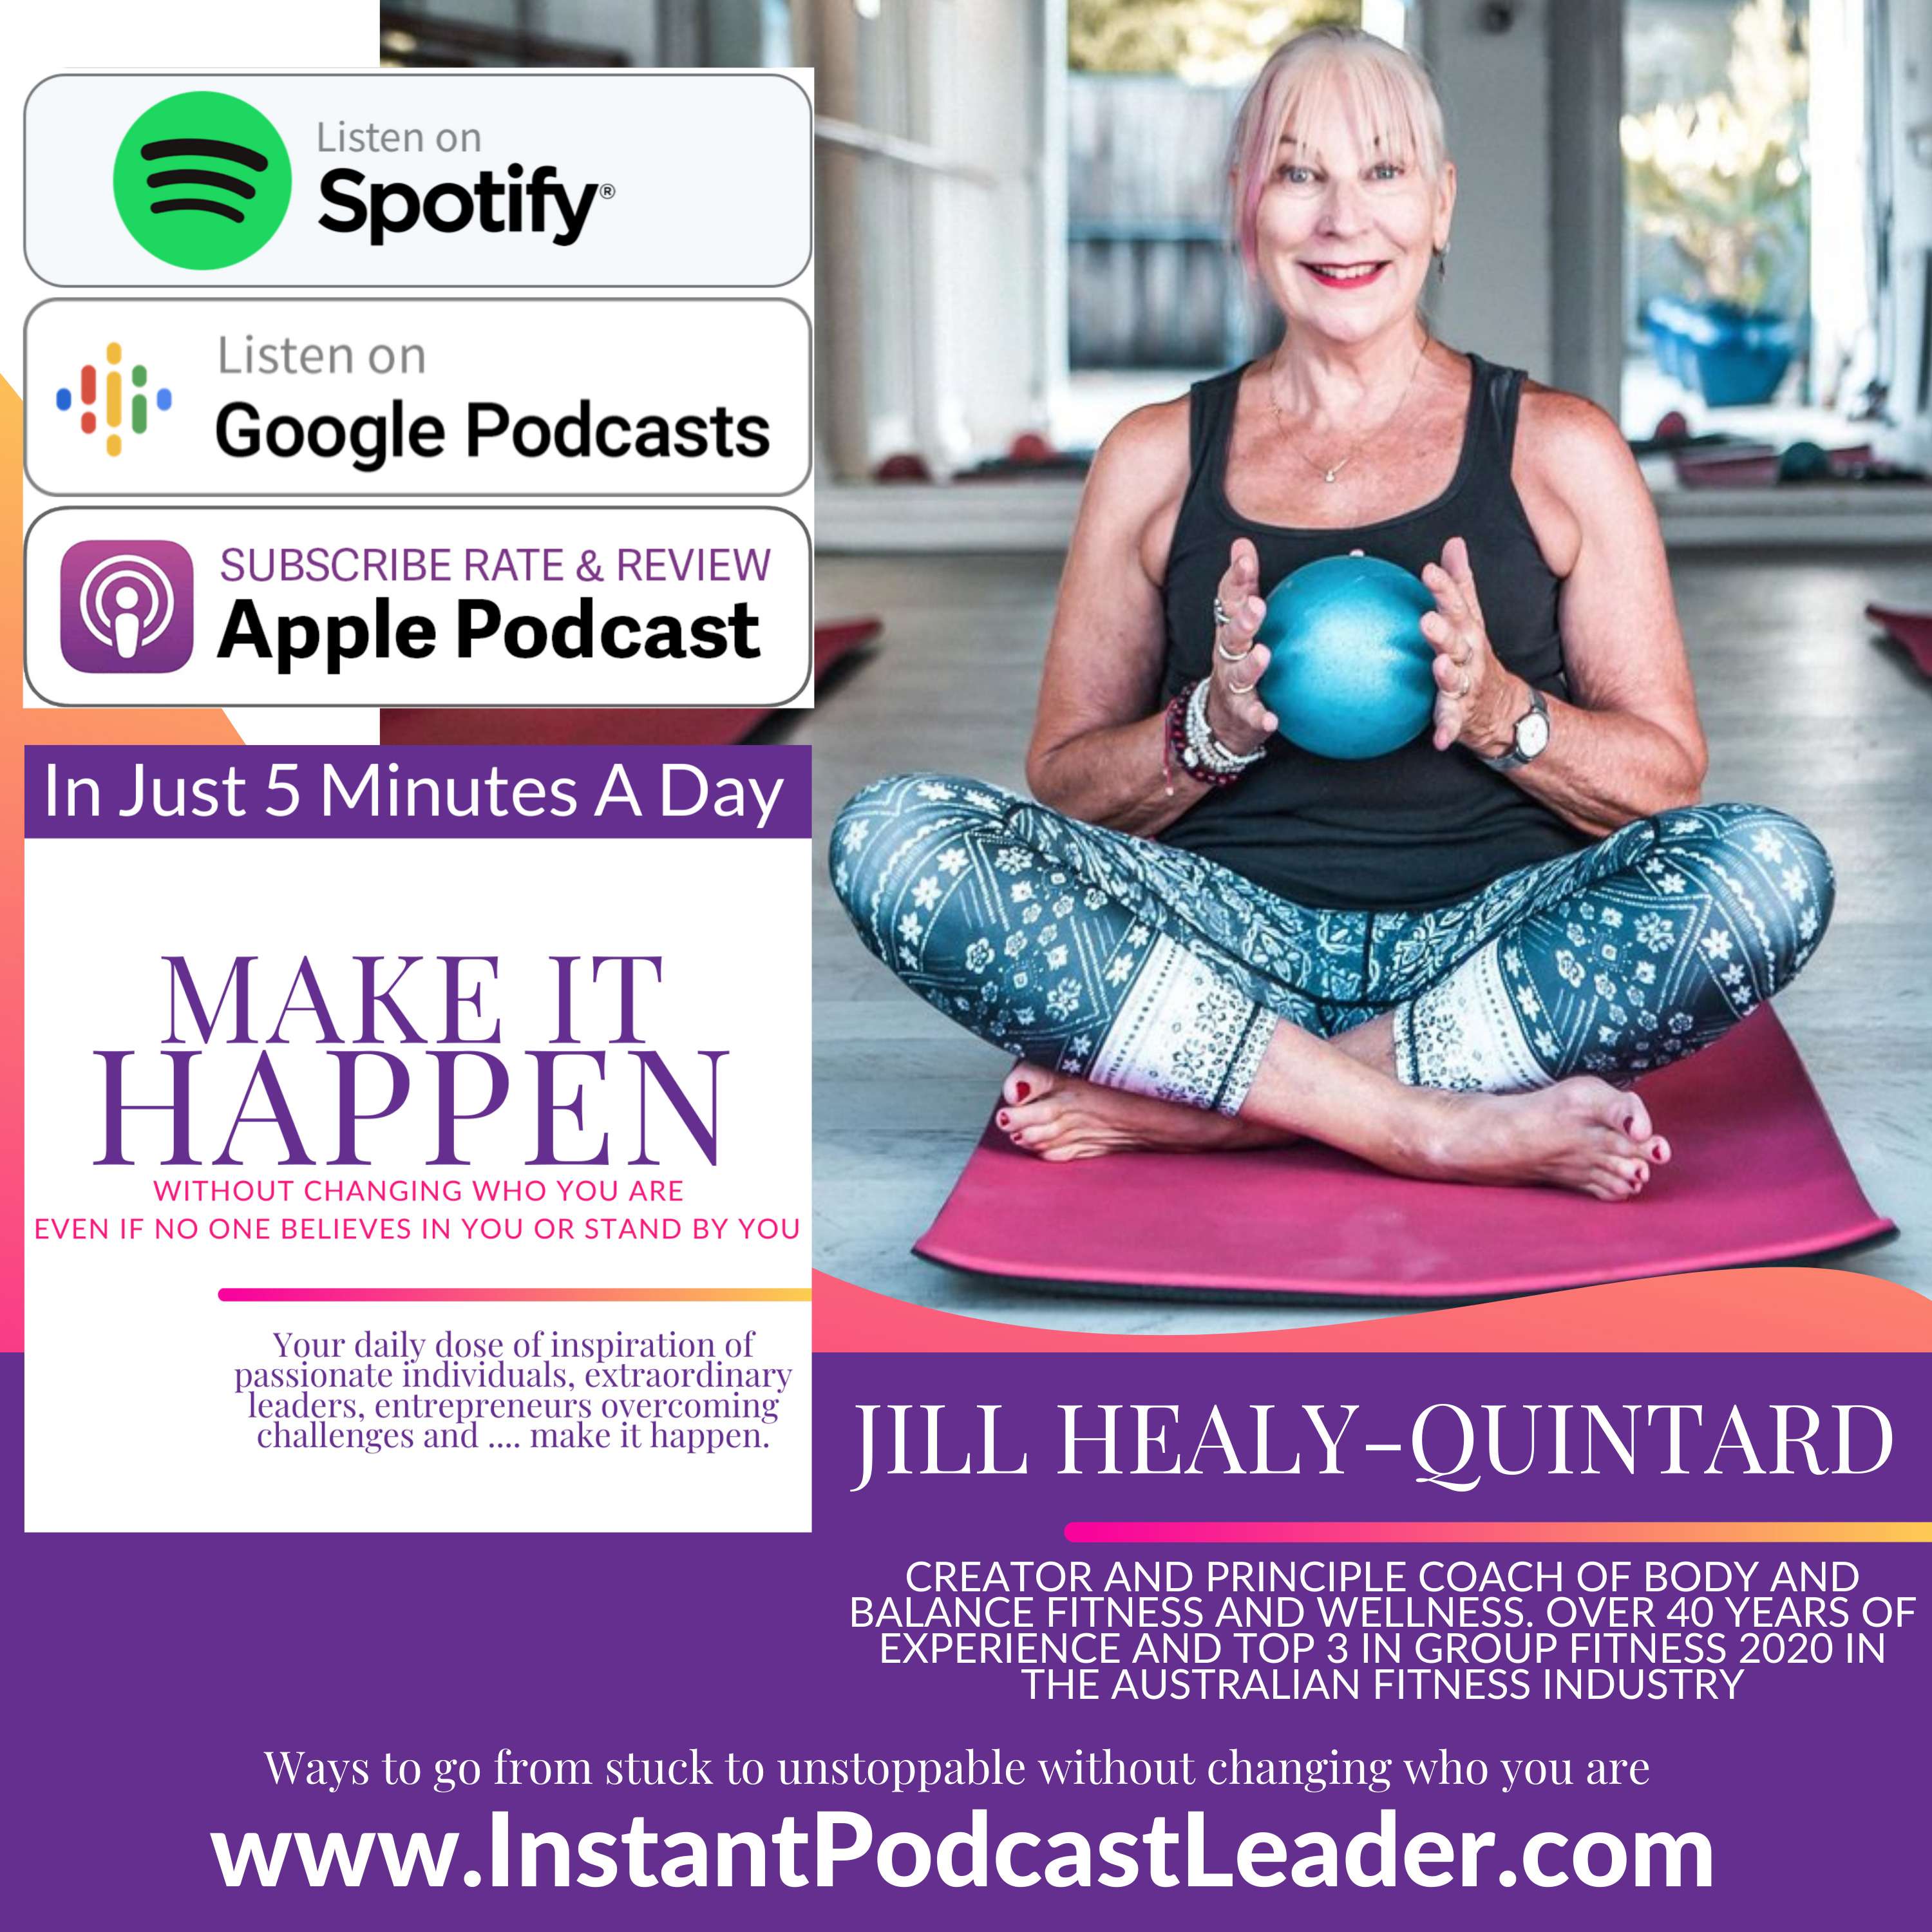 MIH EP51 Jill Healy-Quintard Creator and principle coach of Body and Balance Fitness and Wellness